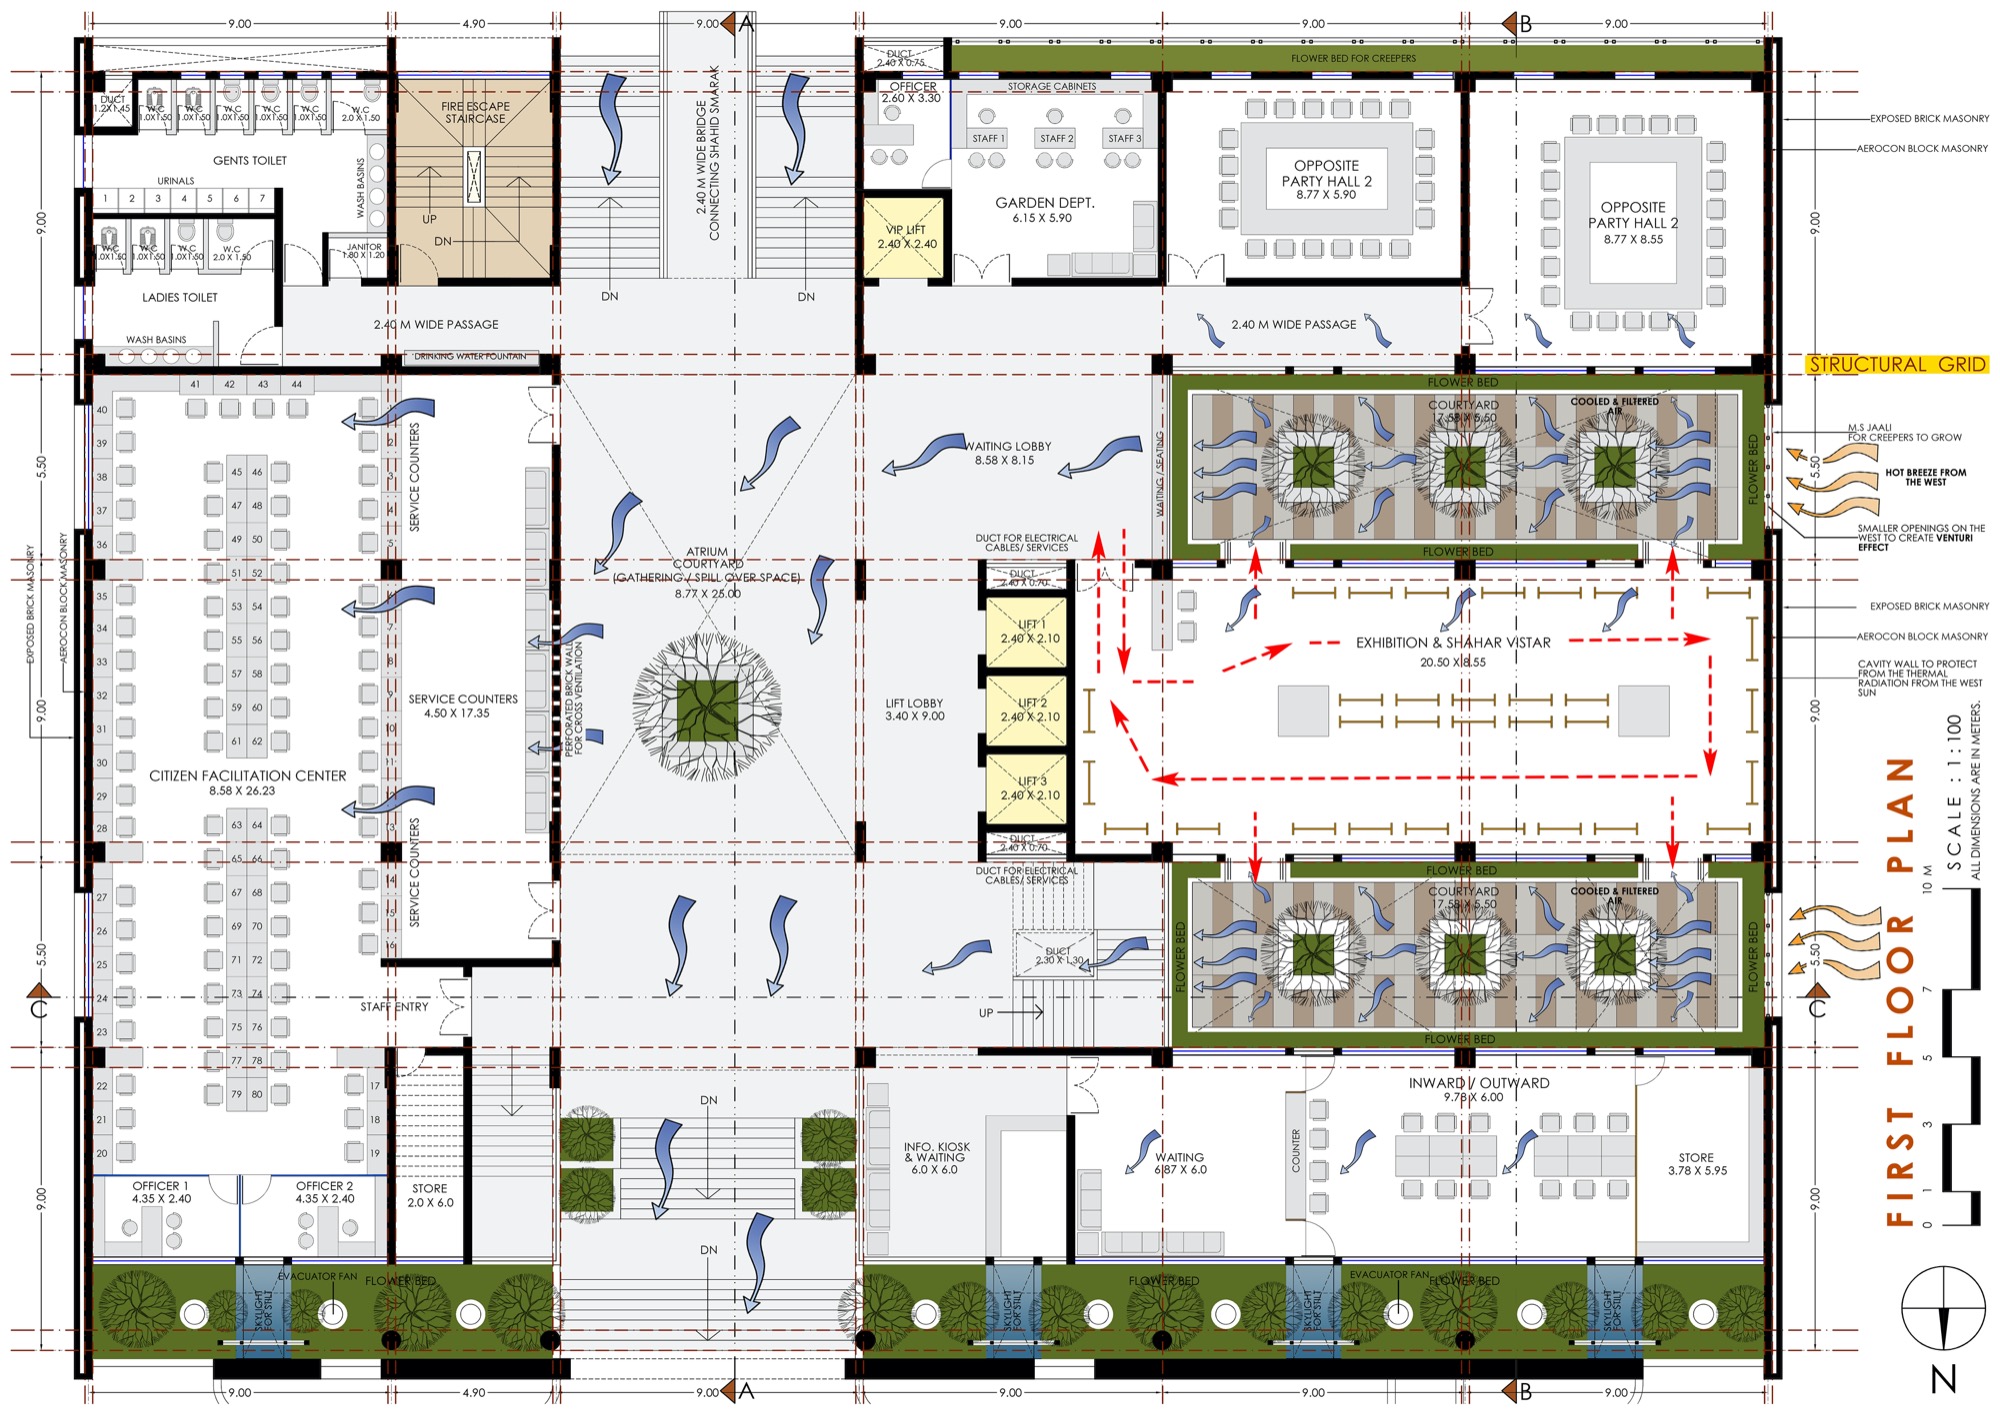 Satara Municipal Corporation, Competition Entry by KENARCH Architects, Pune 42